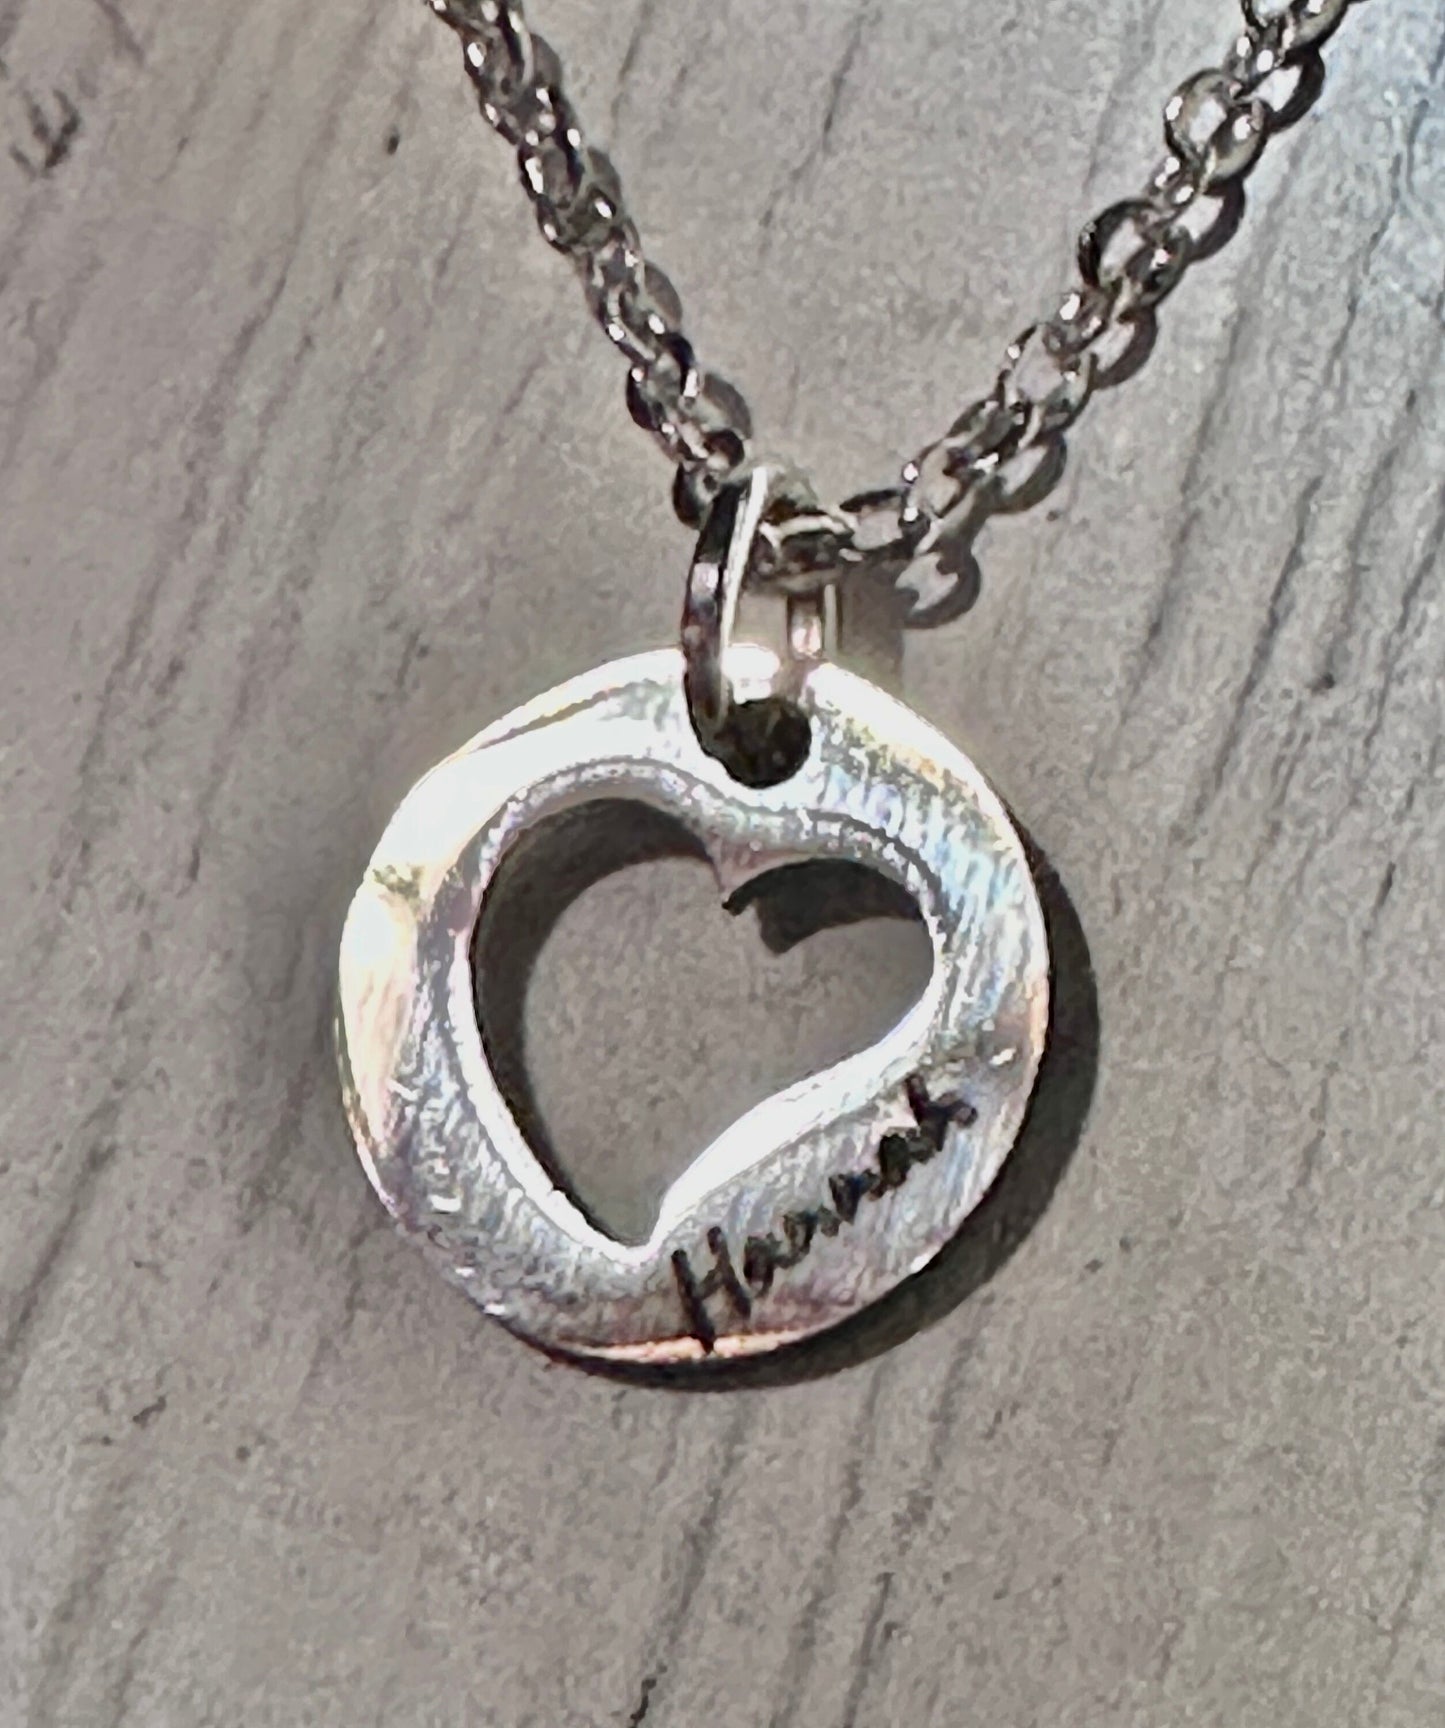 Heart Personalized / Monogrammed Jewelry Charm Necklace in Gold / Silver / Rose Gold - 925 Sterling Silver Chain